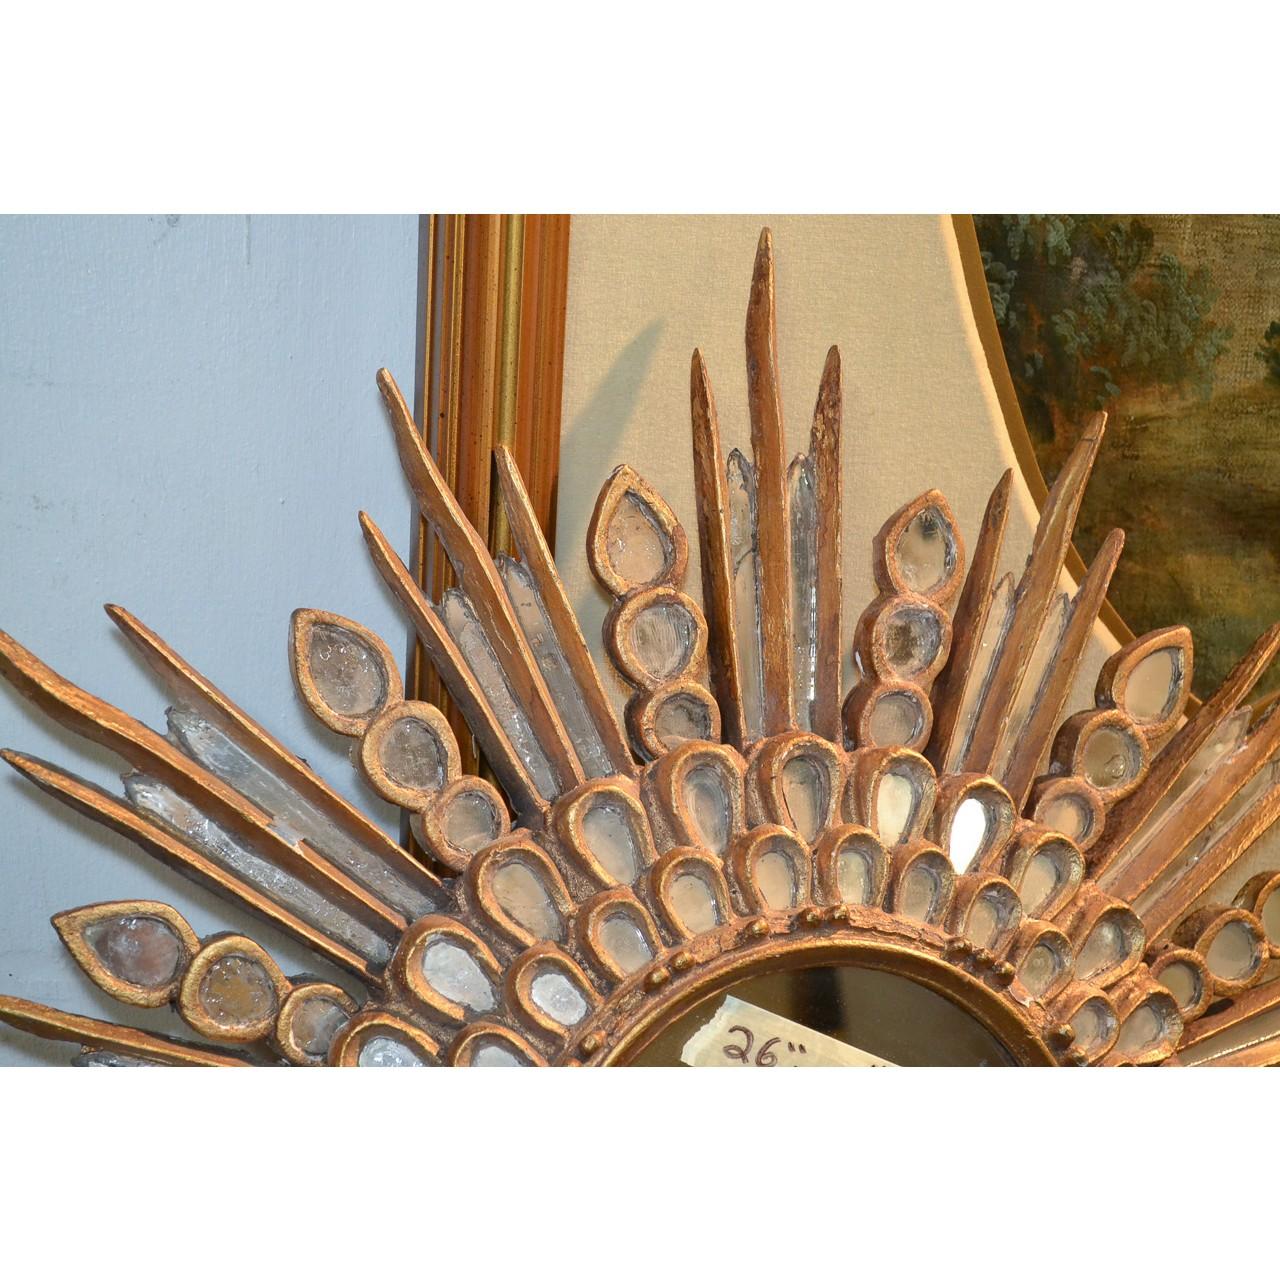 Outstanding 1940s Hollywood Regency style sunburst wall mirror. Handcrafted in Italy and featuring a circular center mirror and surrounded by two borders of small oval-shaped mirrors and radiant mirrored projections. 

Fantastic accent piece ideal